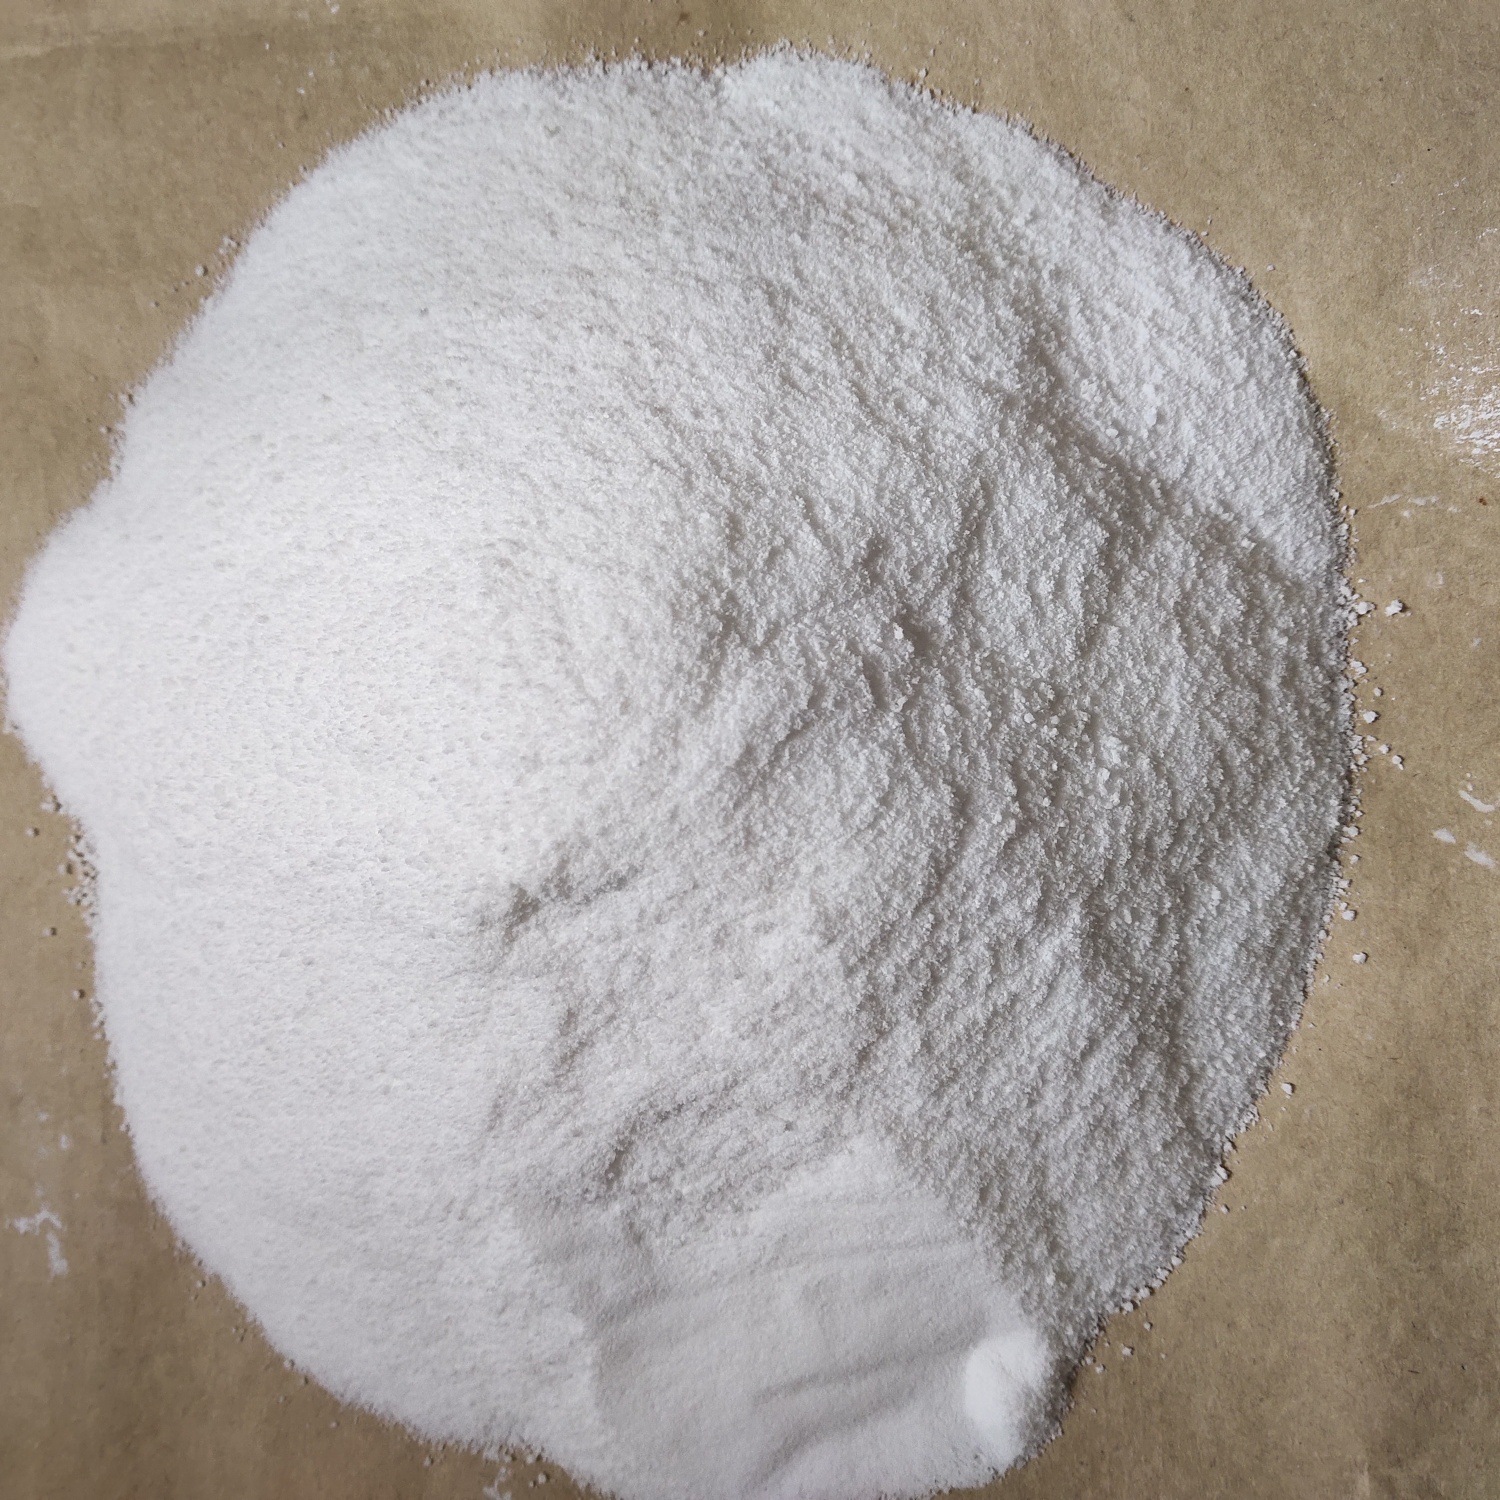 XT-30F: The Revolutionary Powder That Can Reduce Costs and Improve Safety